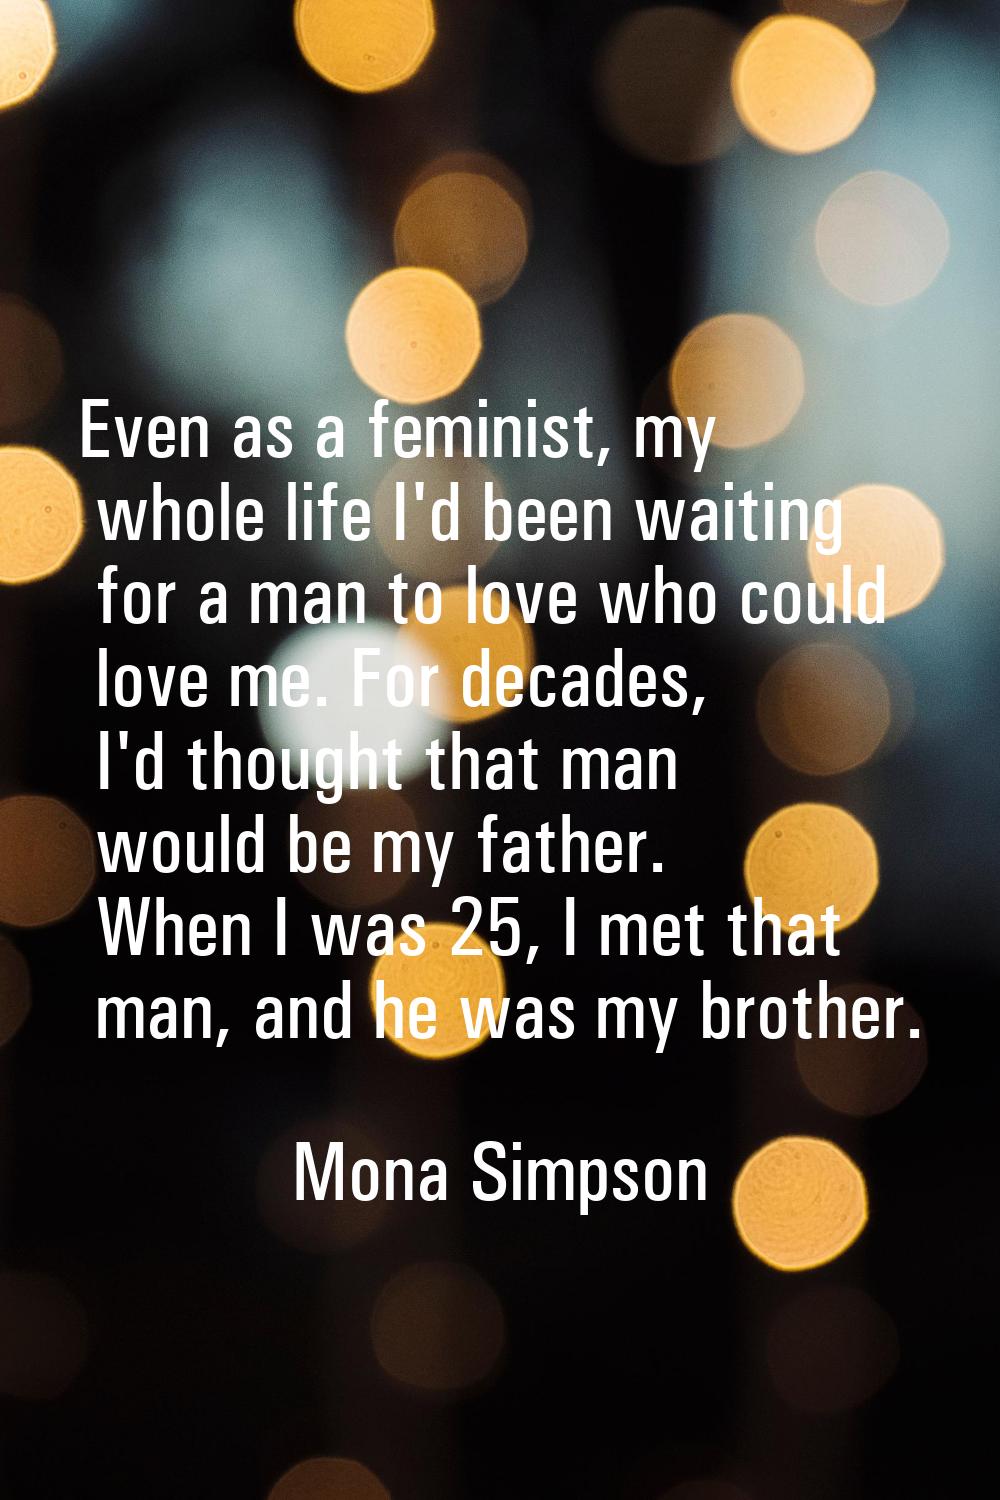 Even as a feminist, my whole life I'd been waiting for a man to love who could love me. For decades